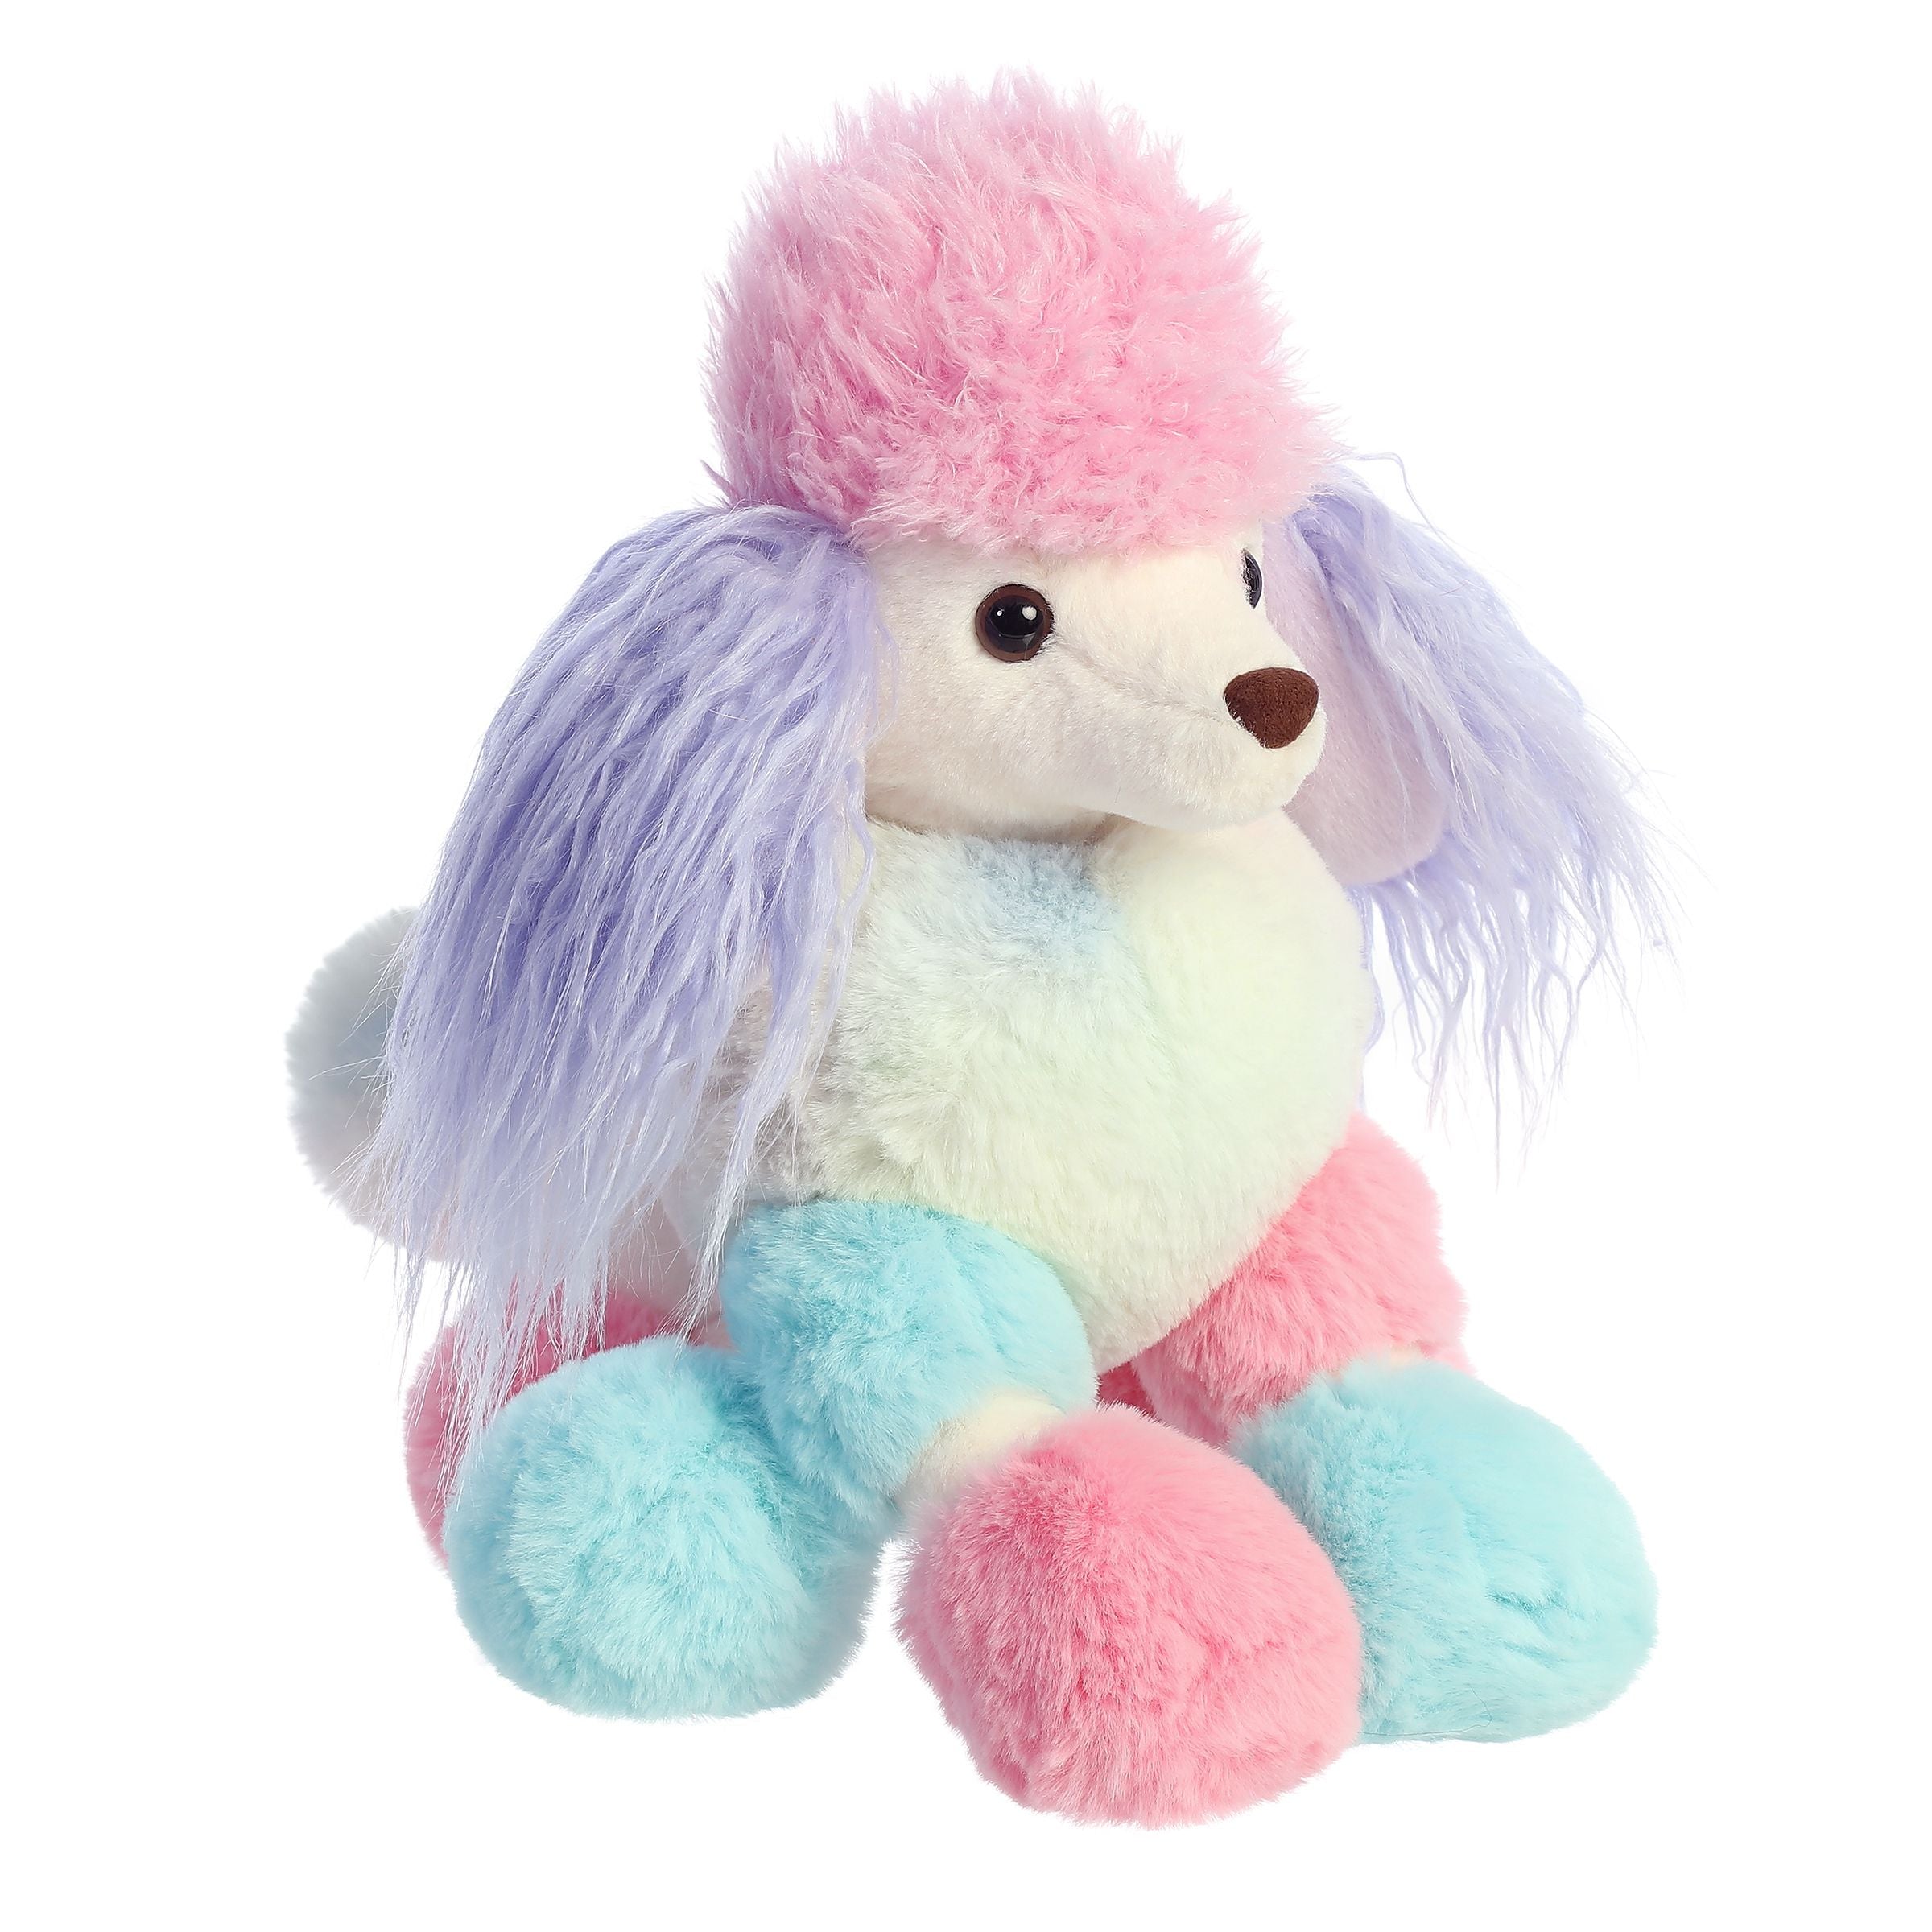 Stuffed Dog Valentines for Kids: Pink Poodle Toy + Valentine's Day